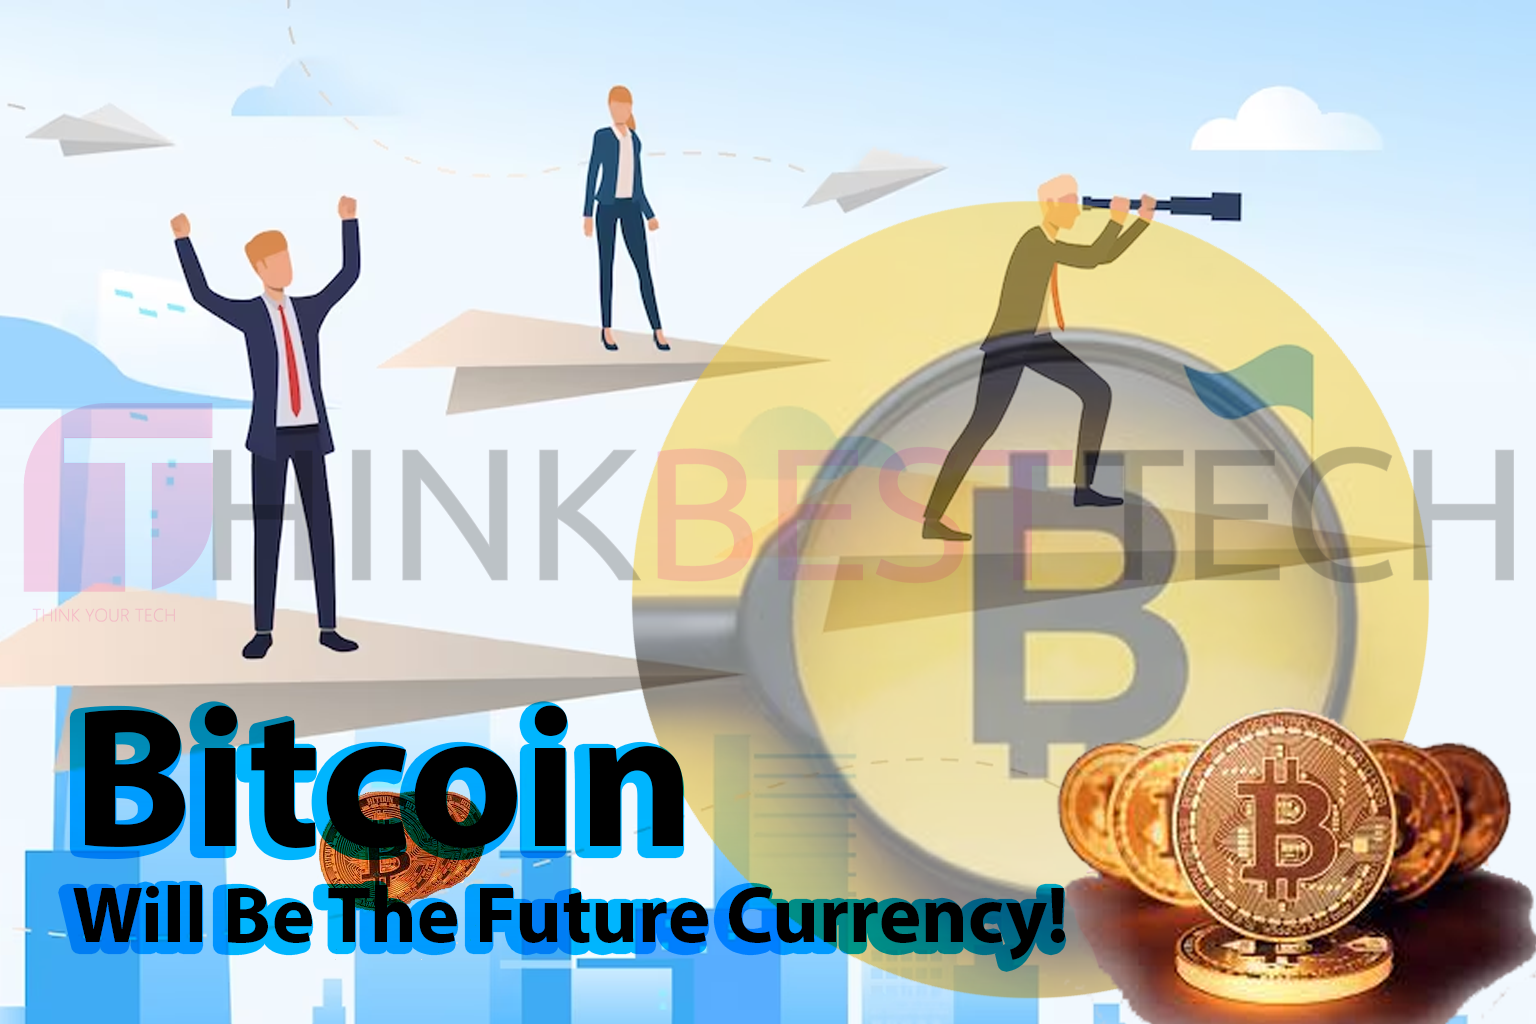 Bitcoin will be the future currency!